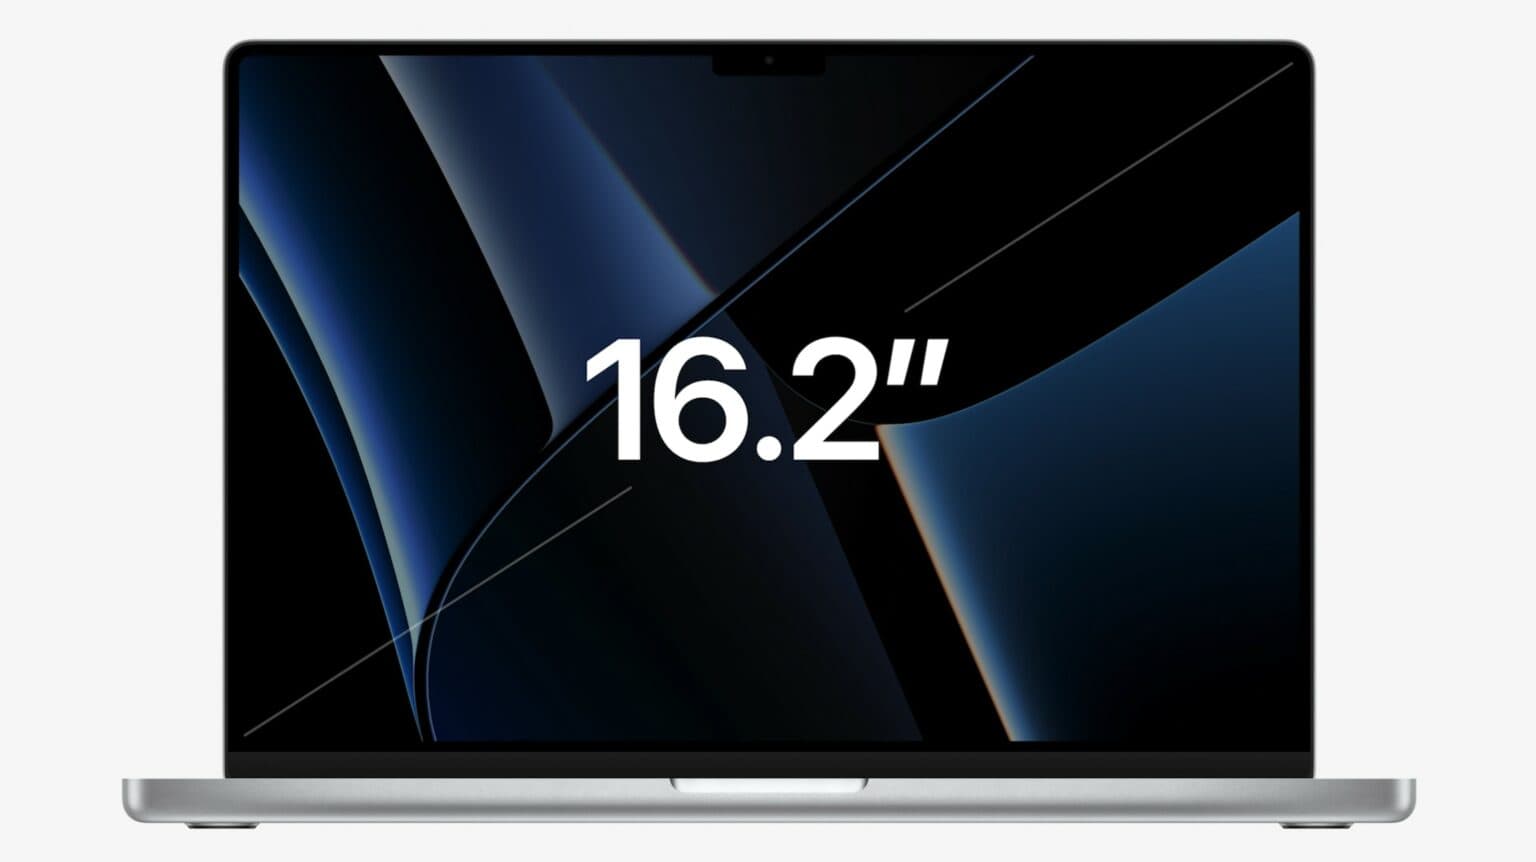 Apple's Unleashed event: The new 16-inch MacBook Pro packs a 16.2-inch screen.